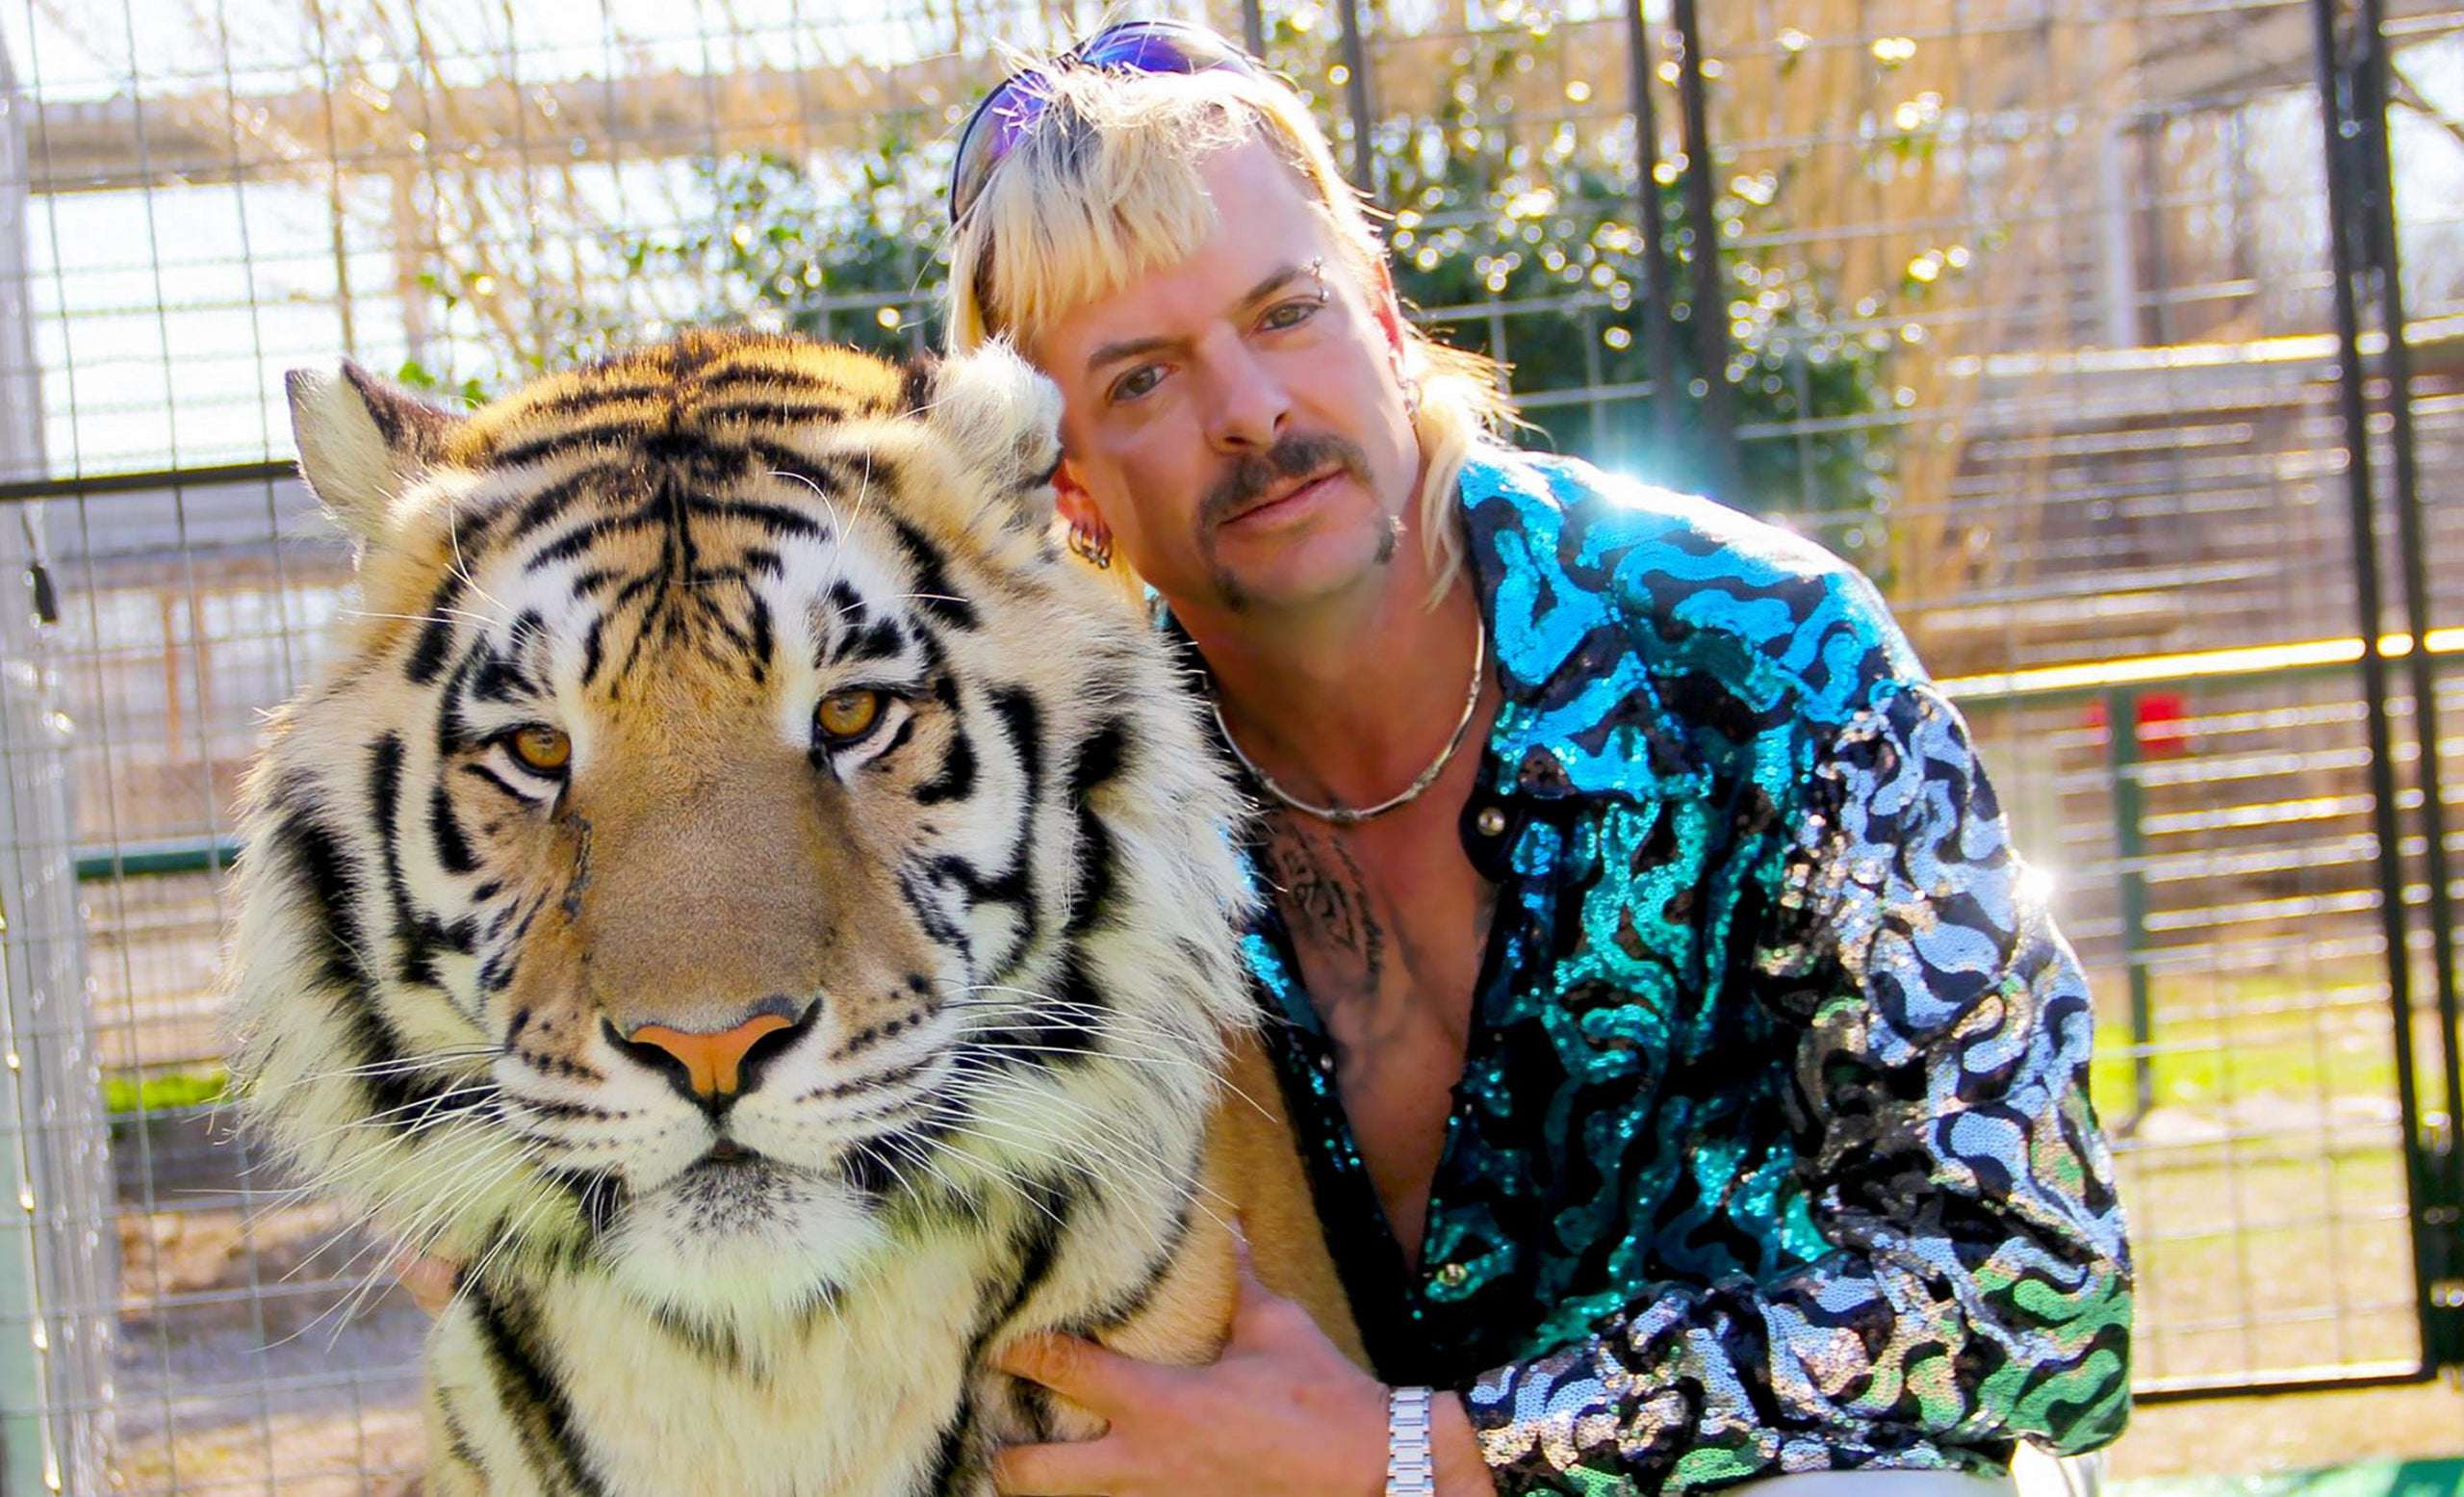 image for Joe Exotic reportedly spent $10,000 in Trump hotel hoping for presidential pardon